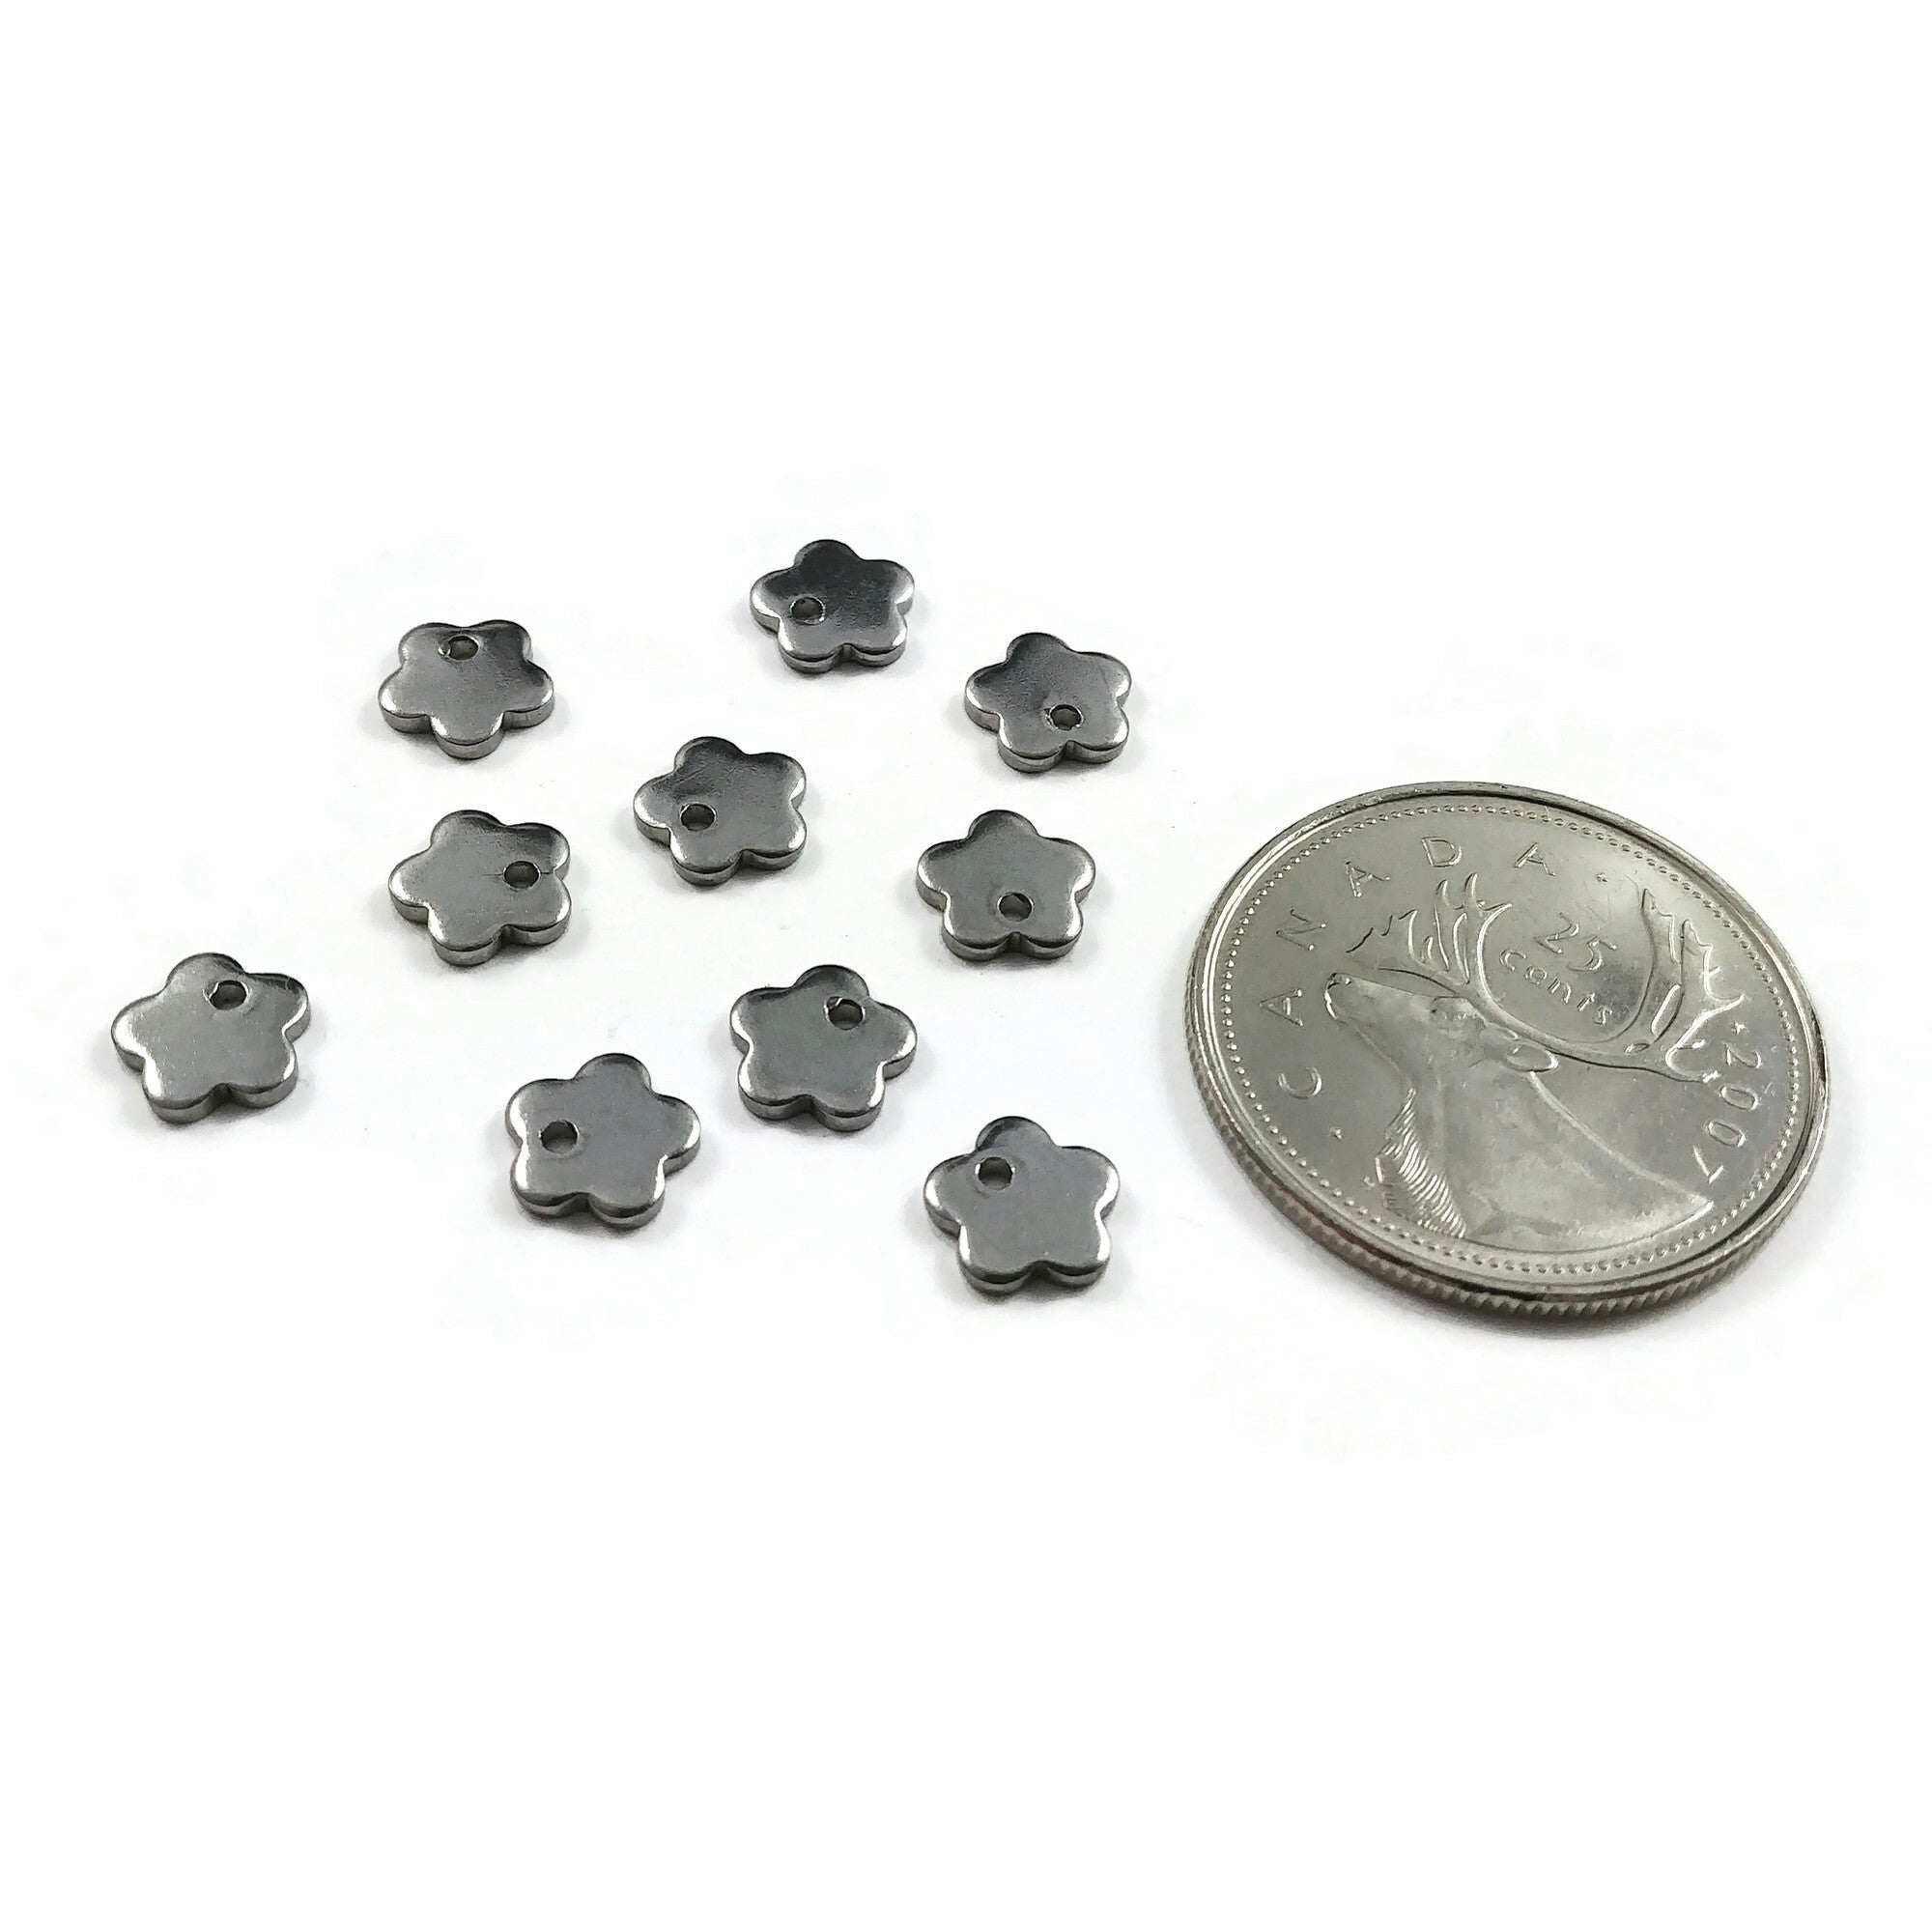 Tiny flower charms stainless steel hypoallergenic charms 10pcs